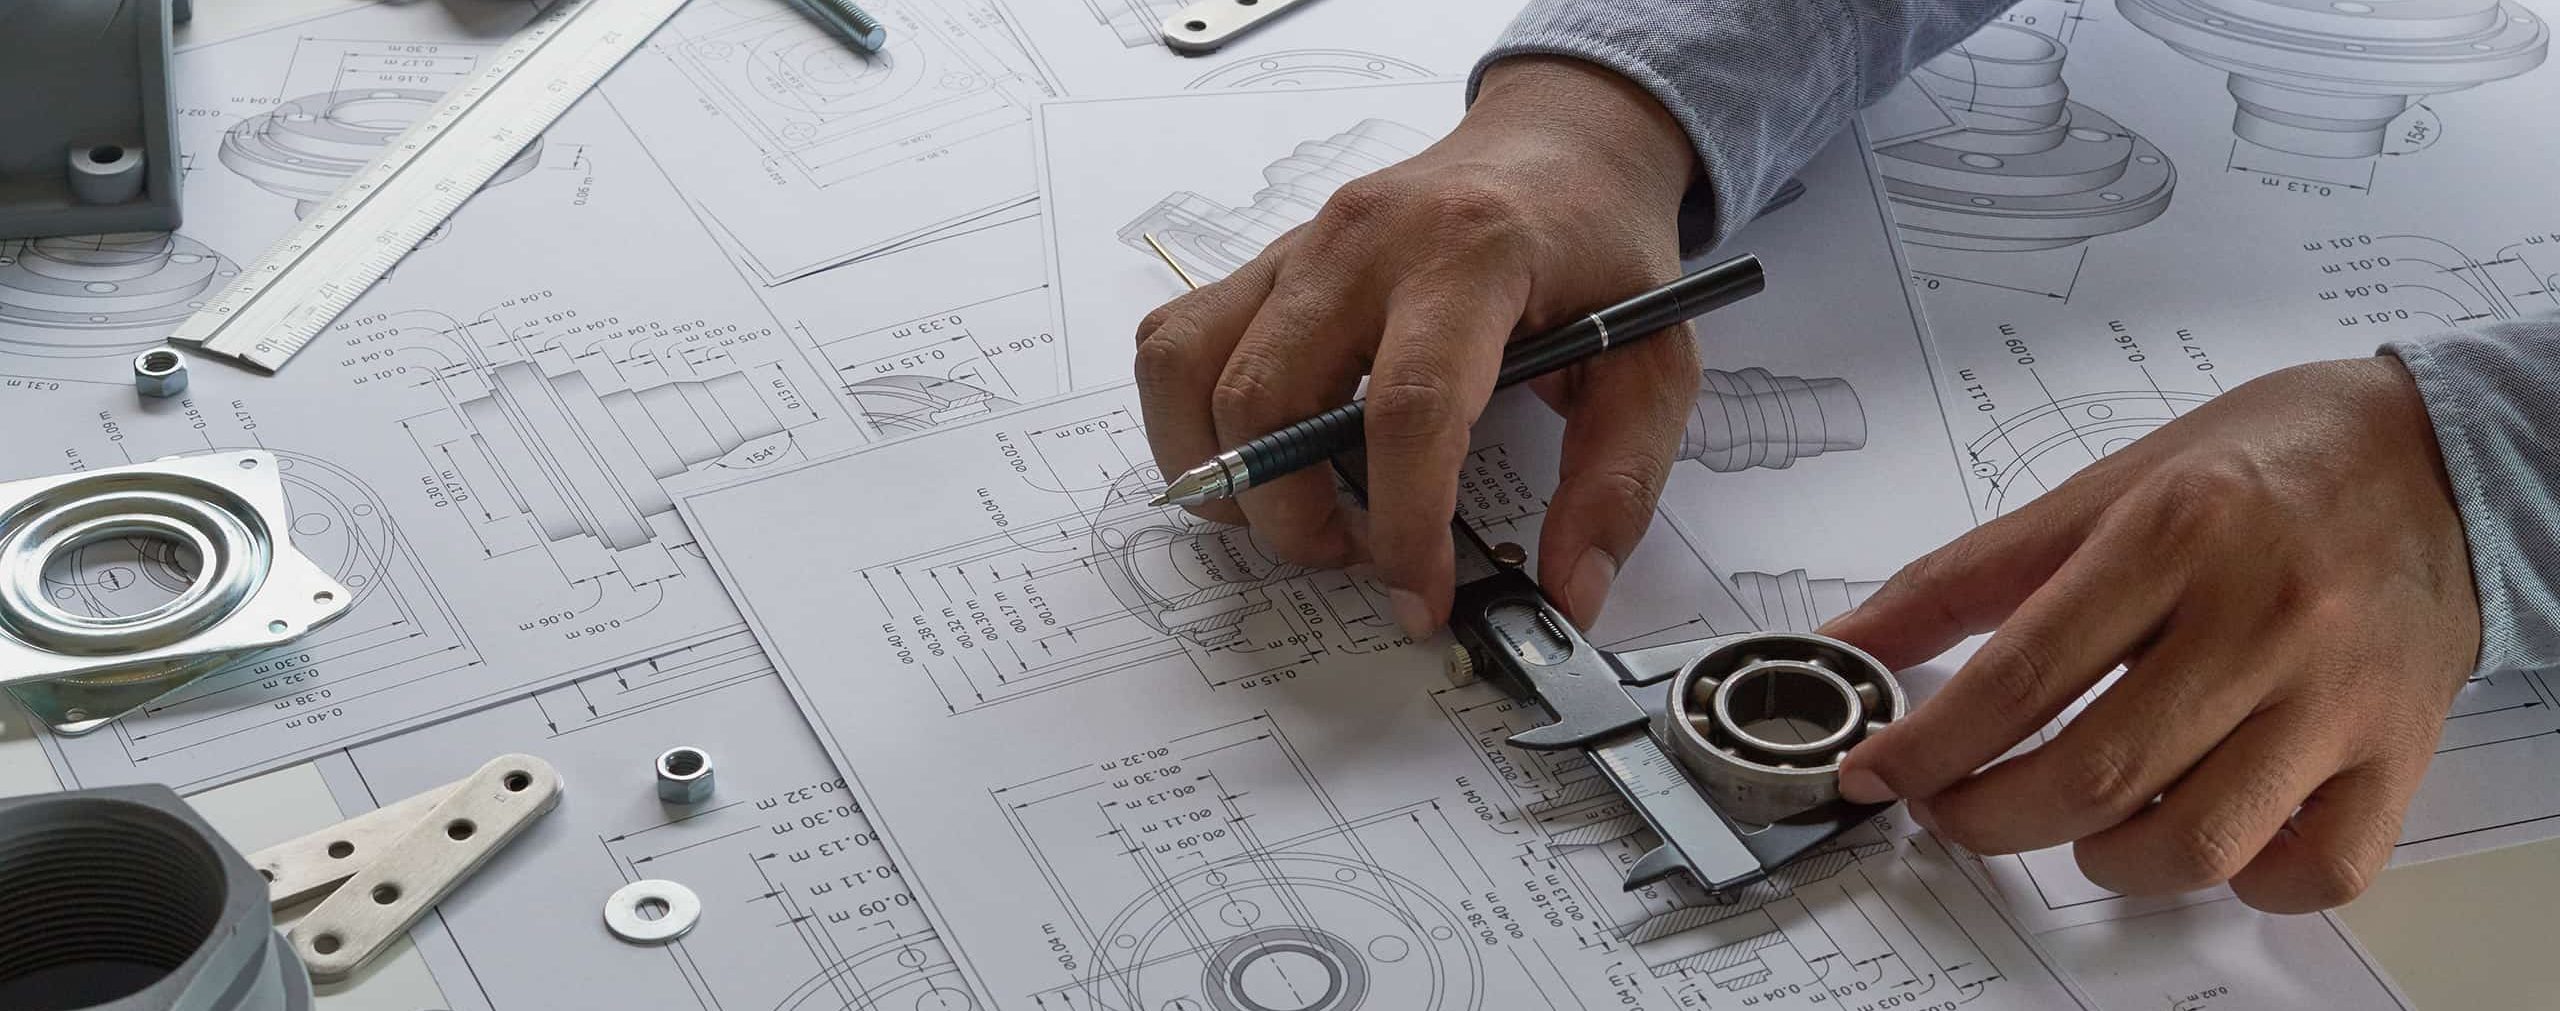 An engineer measuring a cylinder with a set of calipers while looking at drawings